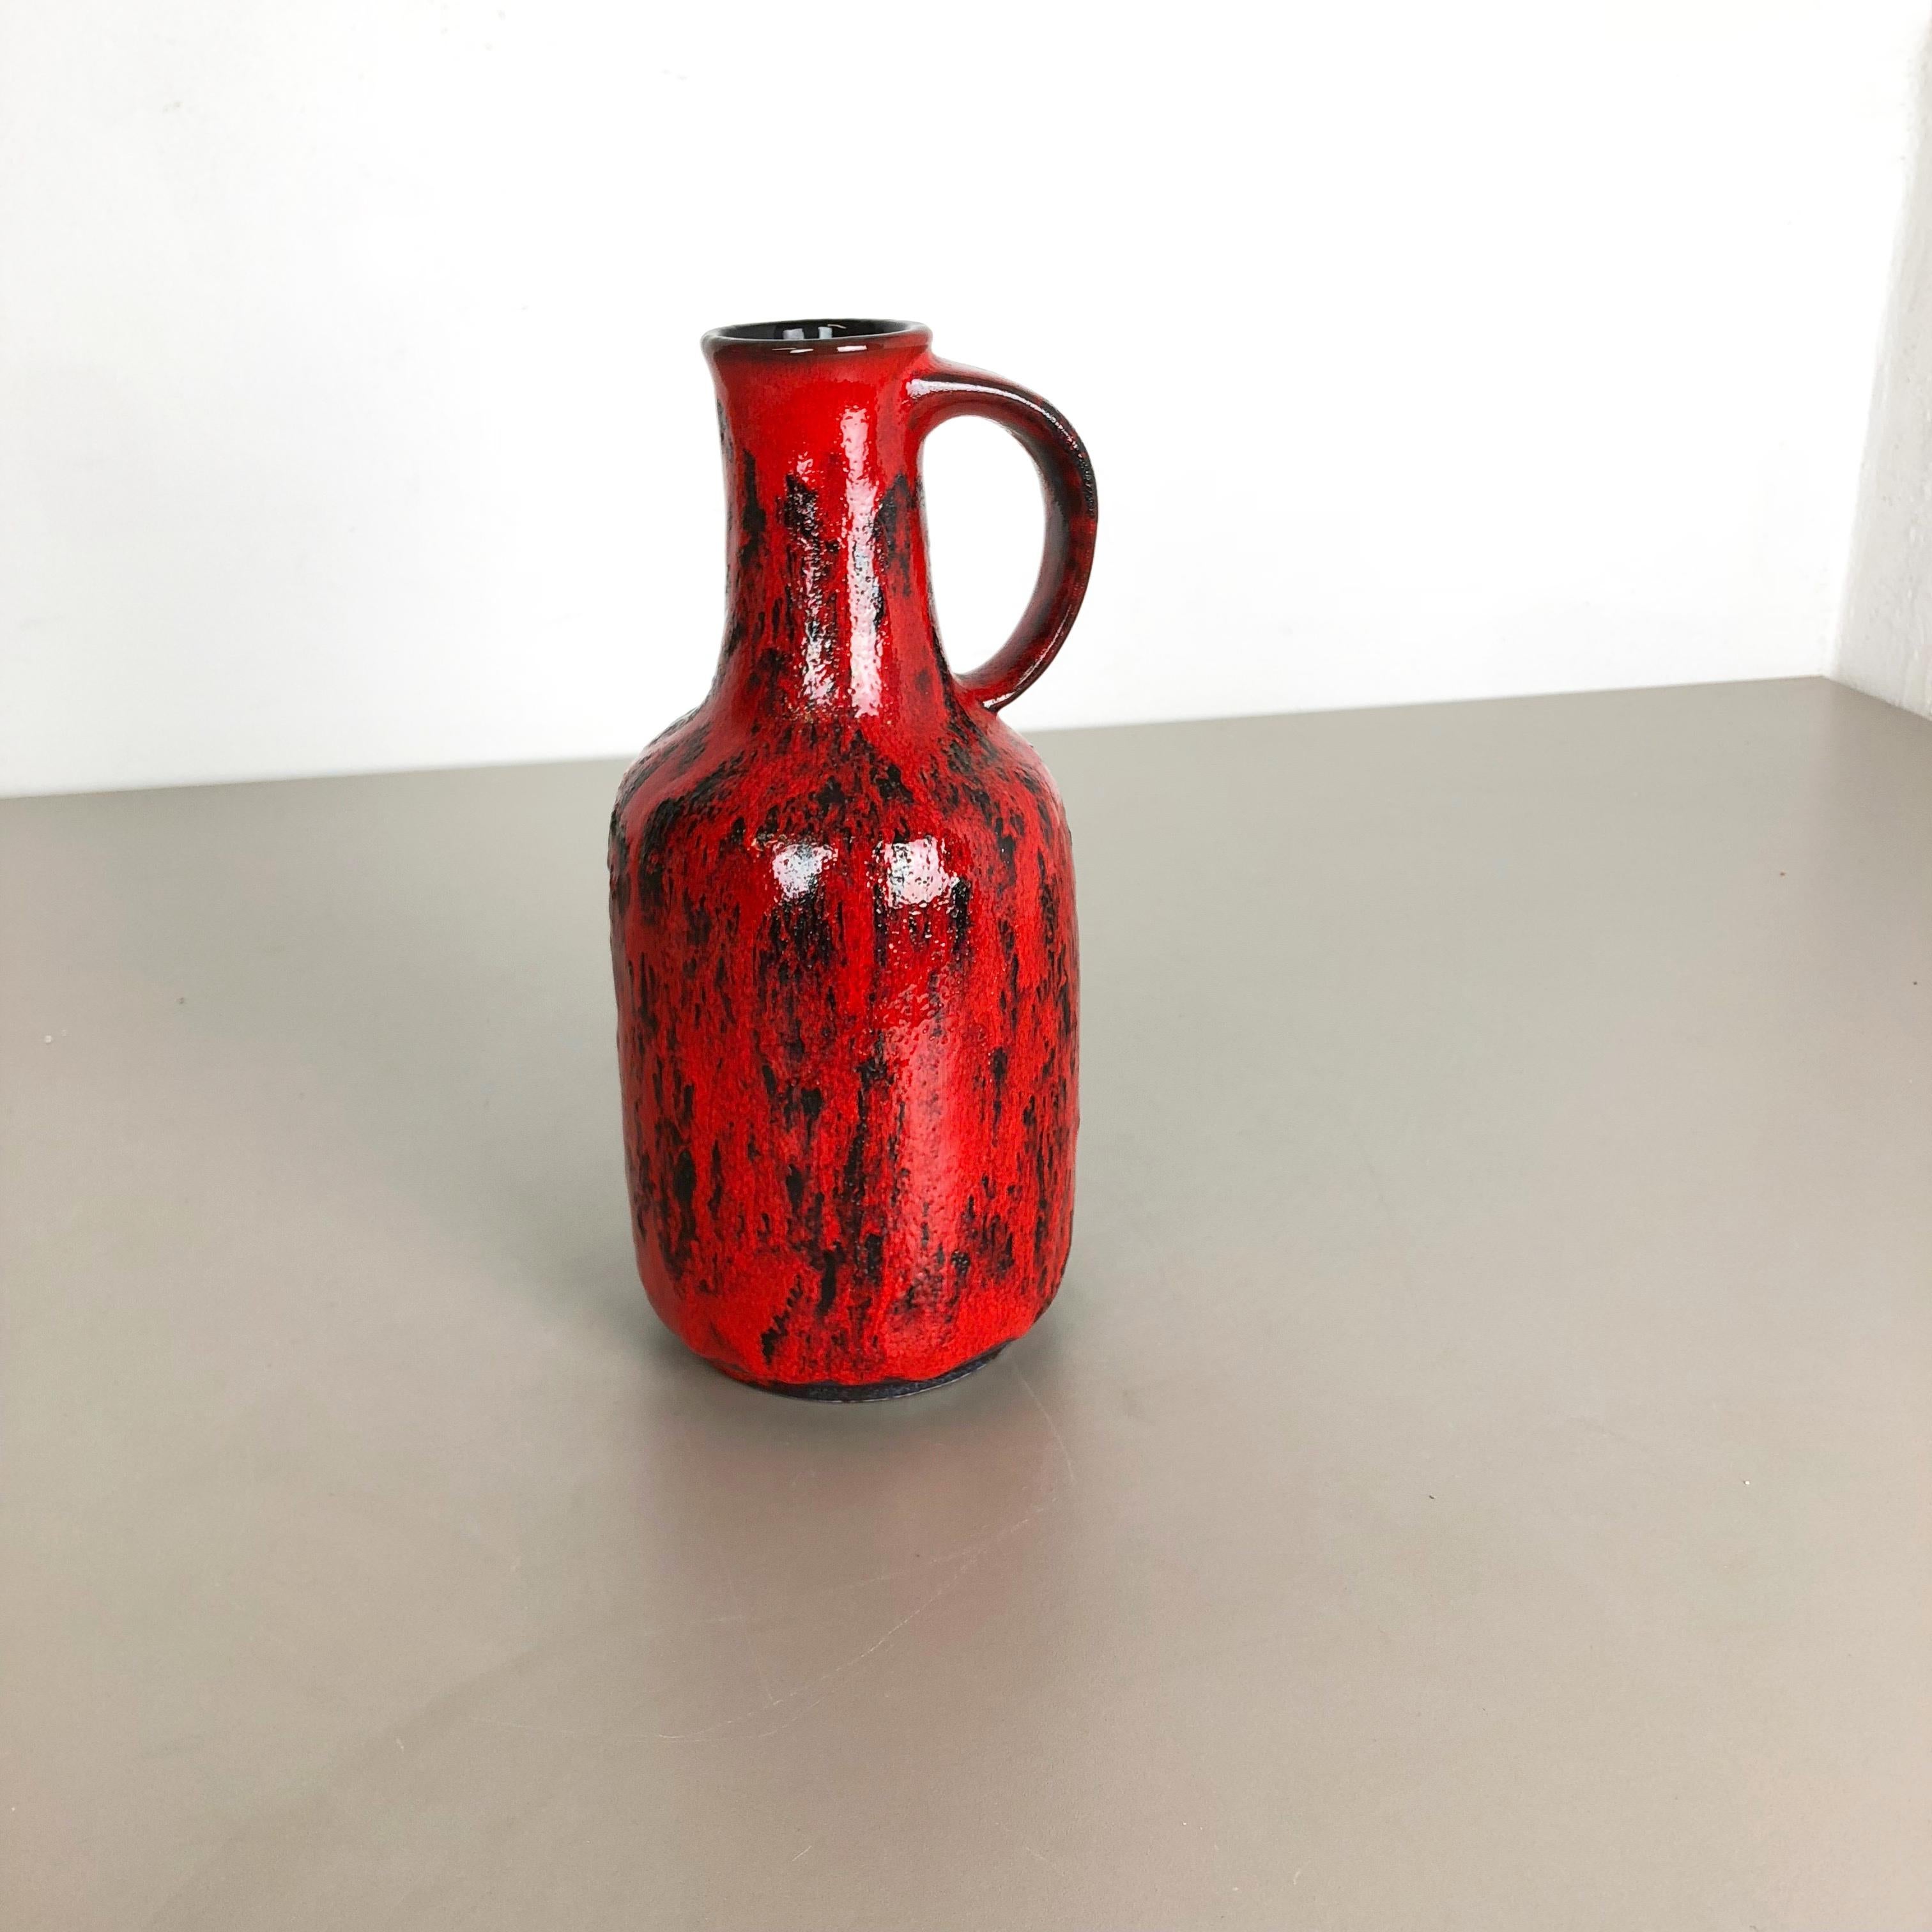 Article:

Pottery ceramic vase


Producer:

Gräflich Ortenburg, Germany



Decade:

1960s




Original vintage 1960s pottery ceramic vase made in Germany. High quality German production with a nice abstract glaze structure and